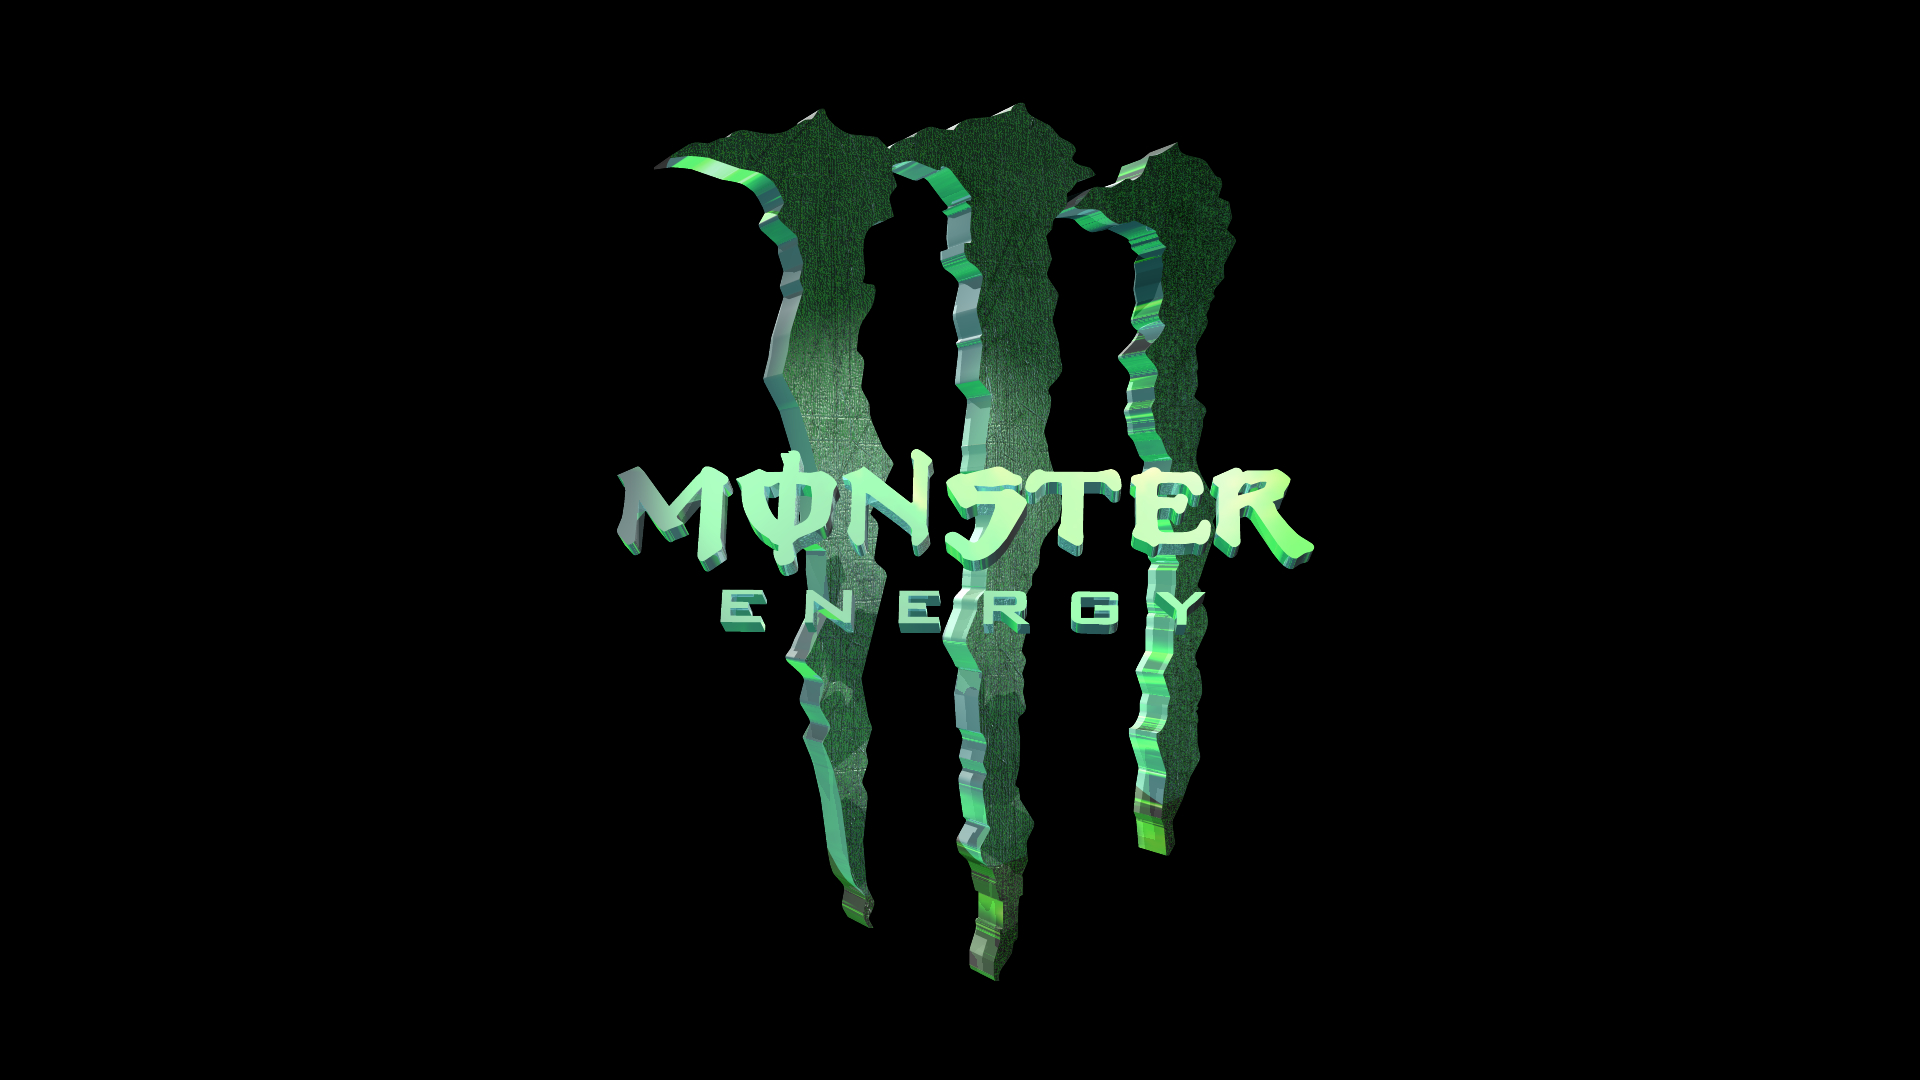 Monster Energy Logo Wallpaper Image Amp Pictures Becuo